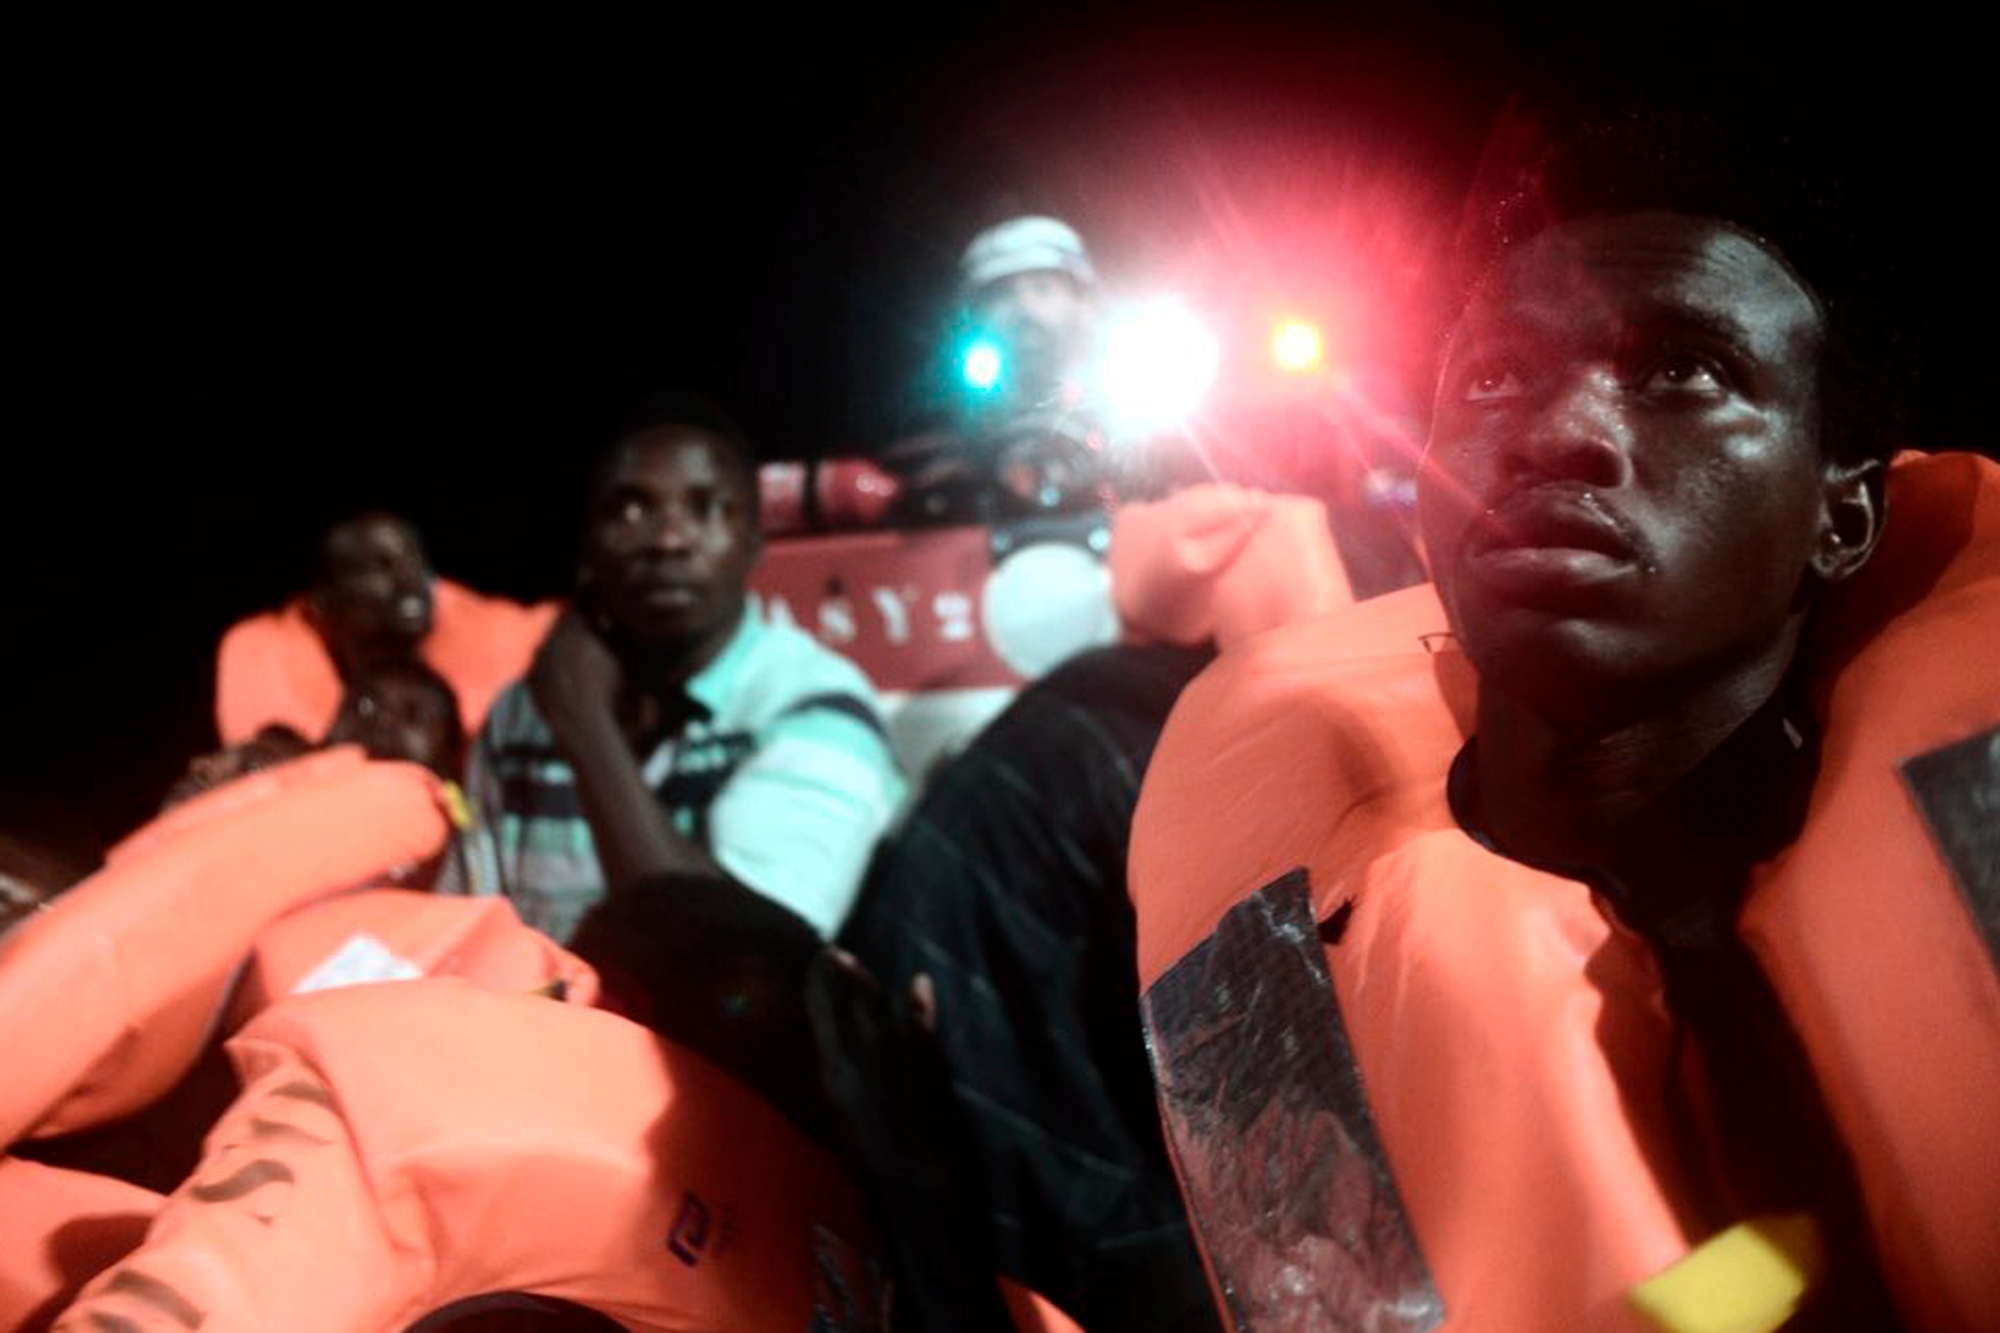 This undated photo released by by French NGO "SOS Mediterranee" on Monday June 11, 2018 and posted on it's Twitter account, shows migrants aboard SOS Mediterranee's Acquarius ship and MSF (Doctors Without Borders) NGOs, in the Mediterranean Sea. Italy and Malta dug in for a second day and refused to let the rescue ship Acquarius with 629 people aboard dock in their ports, leaving the migrants at sea as a diplomatic standoff escalated under Italy's new anti-immigrant government. (Kenny Karpov/SOS Mediterranee via AP) Europe Migrants